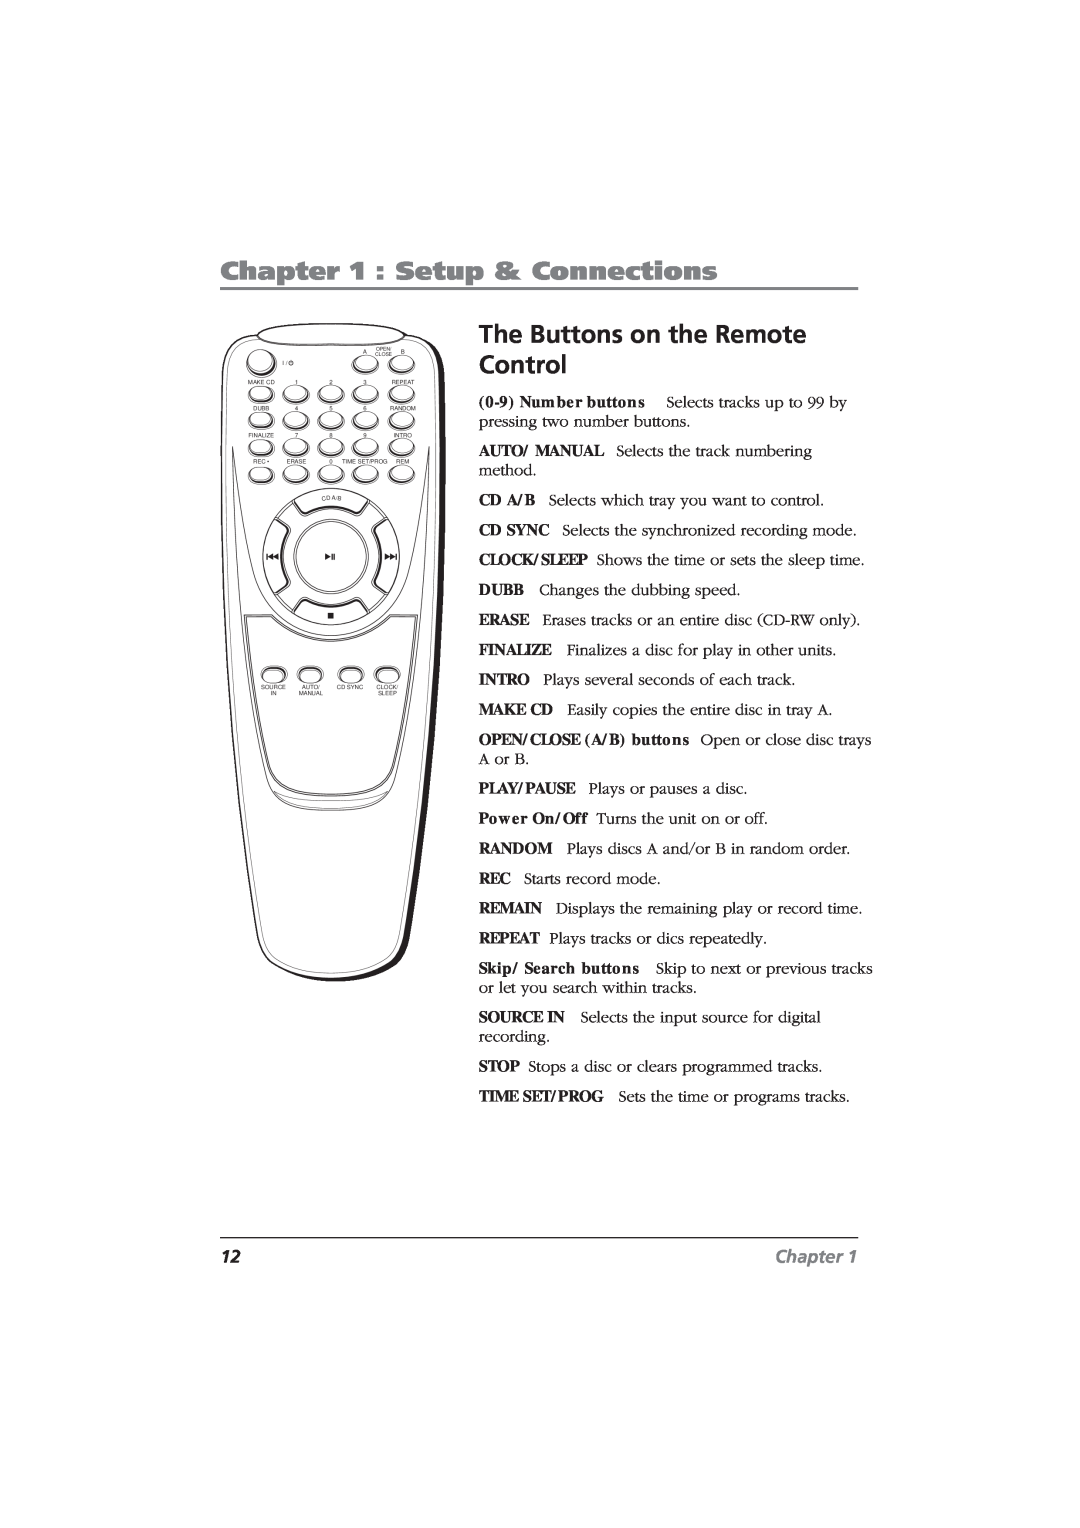 RCA CDRW120 manual The Buttons on the Remote Control, Setup & Connections, Chapter 